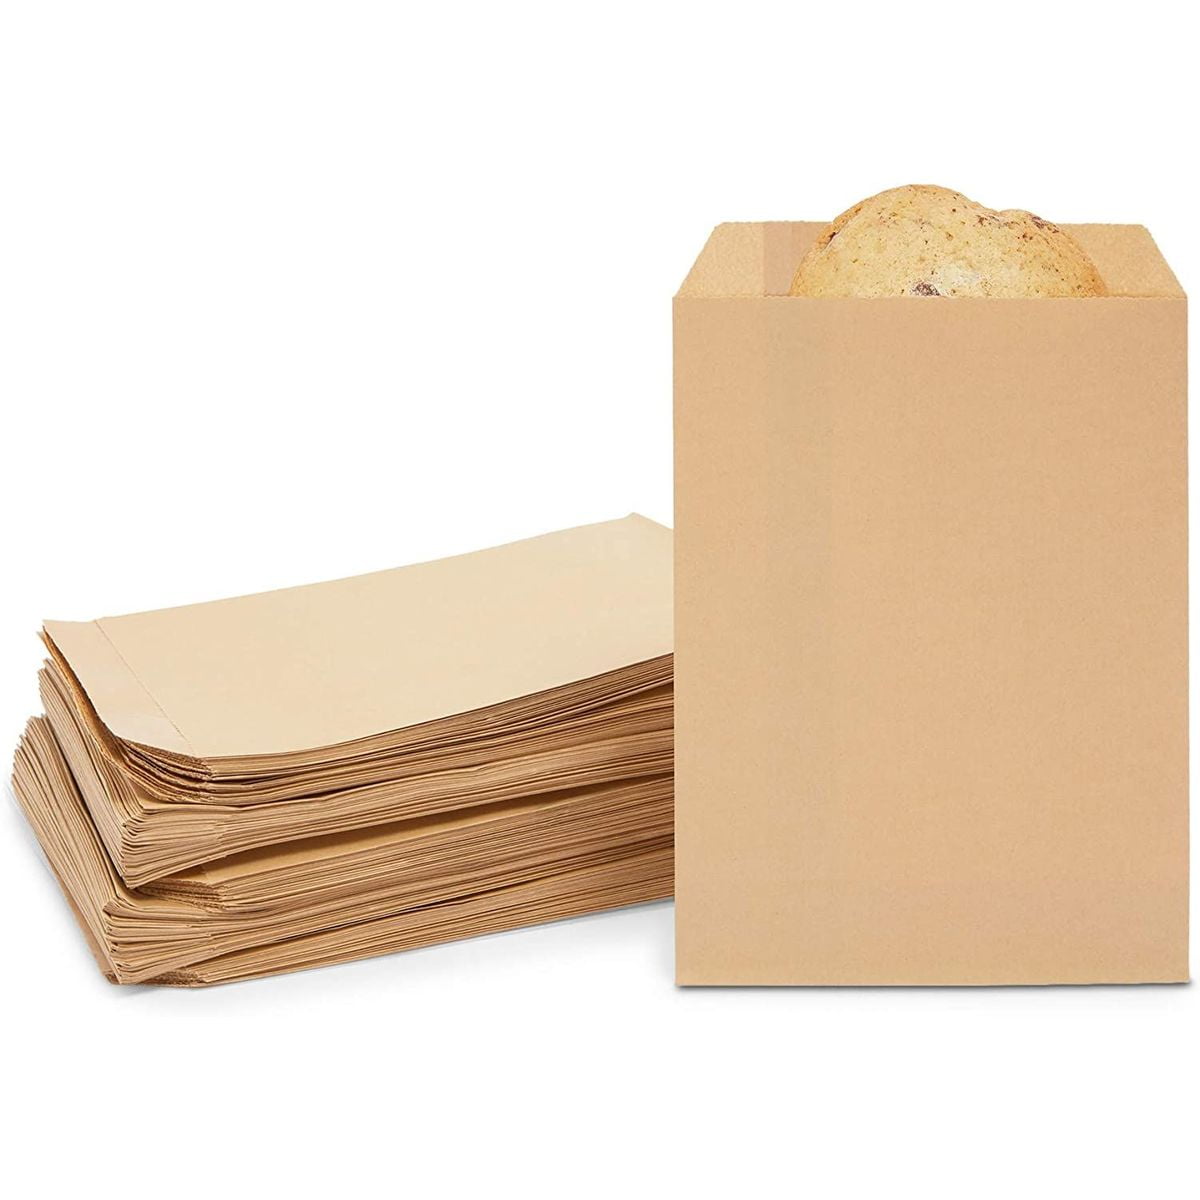 6" x 6" 100x Grease proof Flat Paper Bags Food Market Grocery Sandwich Bags 